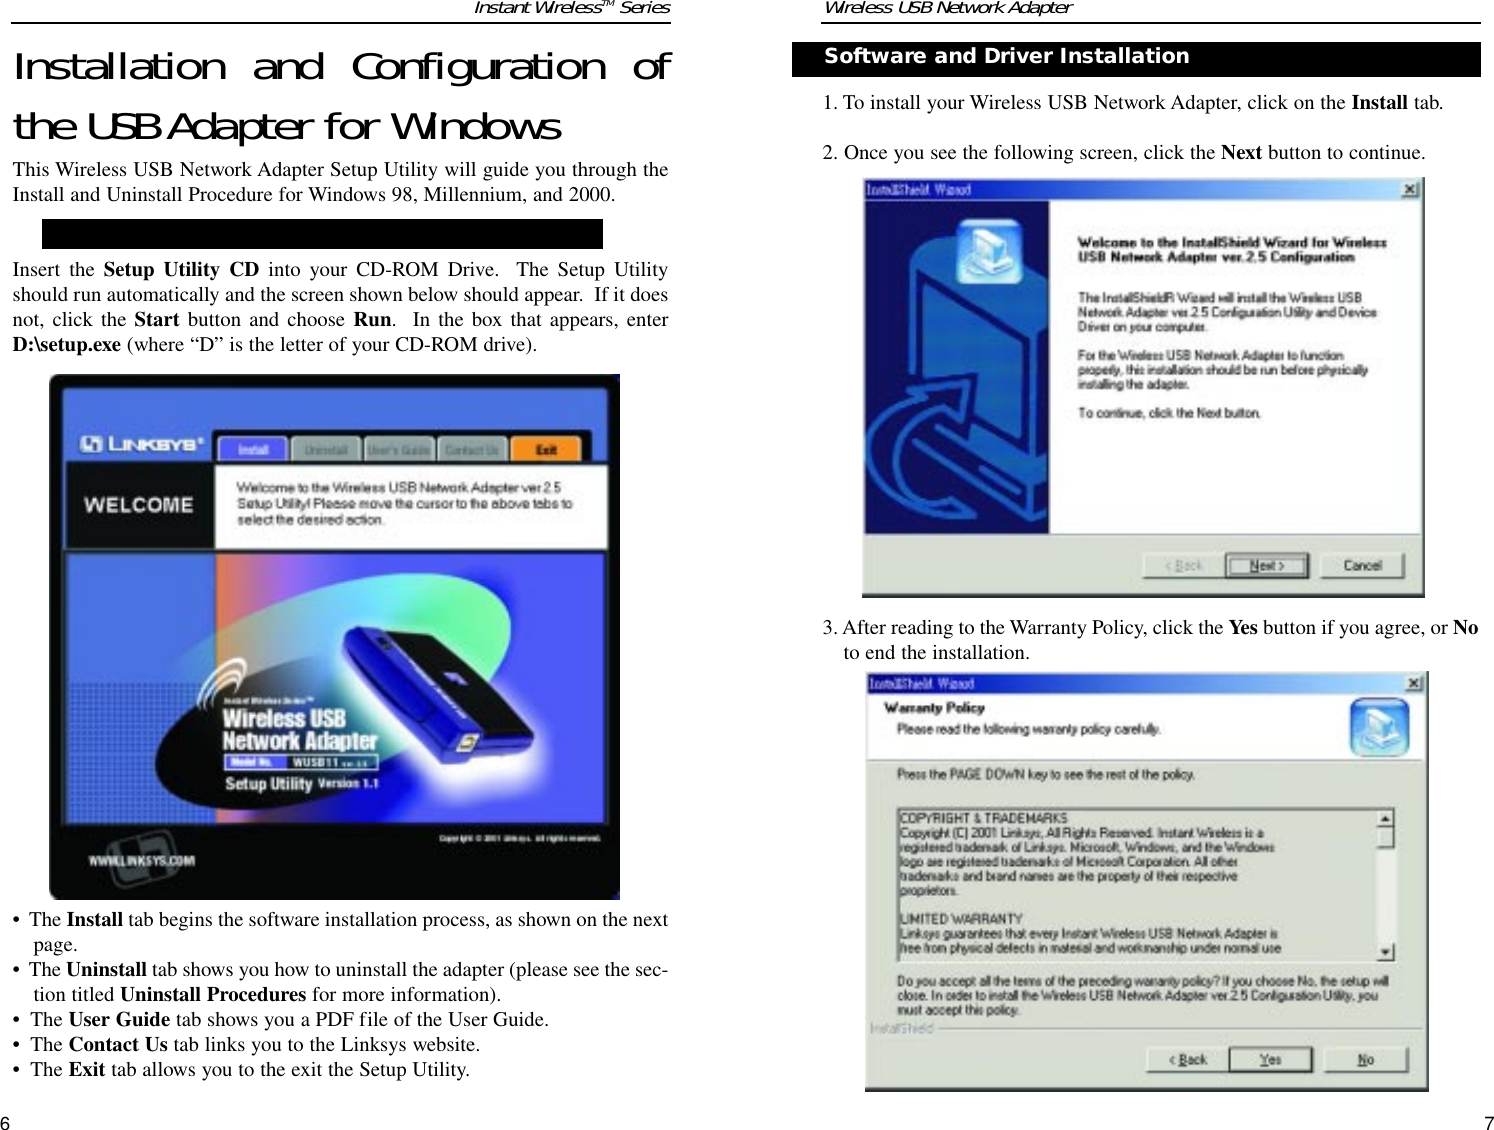 Installation and Configuration ofthe USB Adapter for WindowsThis Wireless USB Network Adapter Setup Utility will guide you through theInstall and Uninstall Procedure for Windows 98, Millennium, and 2000.Insert the Setup Utility CD into your CD-ROM Drive.  The Setup Utilityshould run automatically and the screen shown below should appear.  If it doesnot, click the Start button and choose Run.  In the box that appears, enterD:\setup.exe (where “D” is the letter of your CD-ROM drive).  •  The Install tab begins the software installation process, as shown on the nextpage. •  The Uninstall tab shows you how to uninstall the adapter (please see the sec-tion titled Uninstall Procedures for more information).•  The User Guide tab shows you a PDF file of the User Guide. •  The Contact Us tab links you to the Linksys website.•  The Exit tab allows you to the exit the Setup Utility.1. To install your Wireless USB Network Adapter, click on the Install tab.2. Once you see the following screen, click the Next button to continue.3. After reading to the Warranty Policy, click the Yes button if you agree, or Noto end the installation.Wireless USB Network AdapterSoftware and Driver Installation     Instant WirelessTM Series76NNoottee::You must install this software before installation of the hardware.